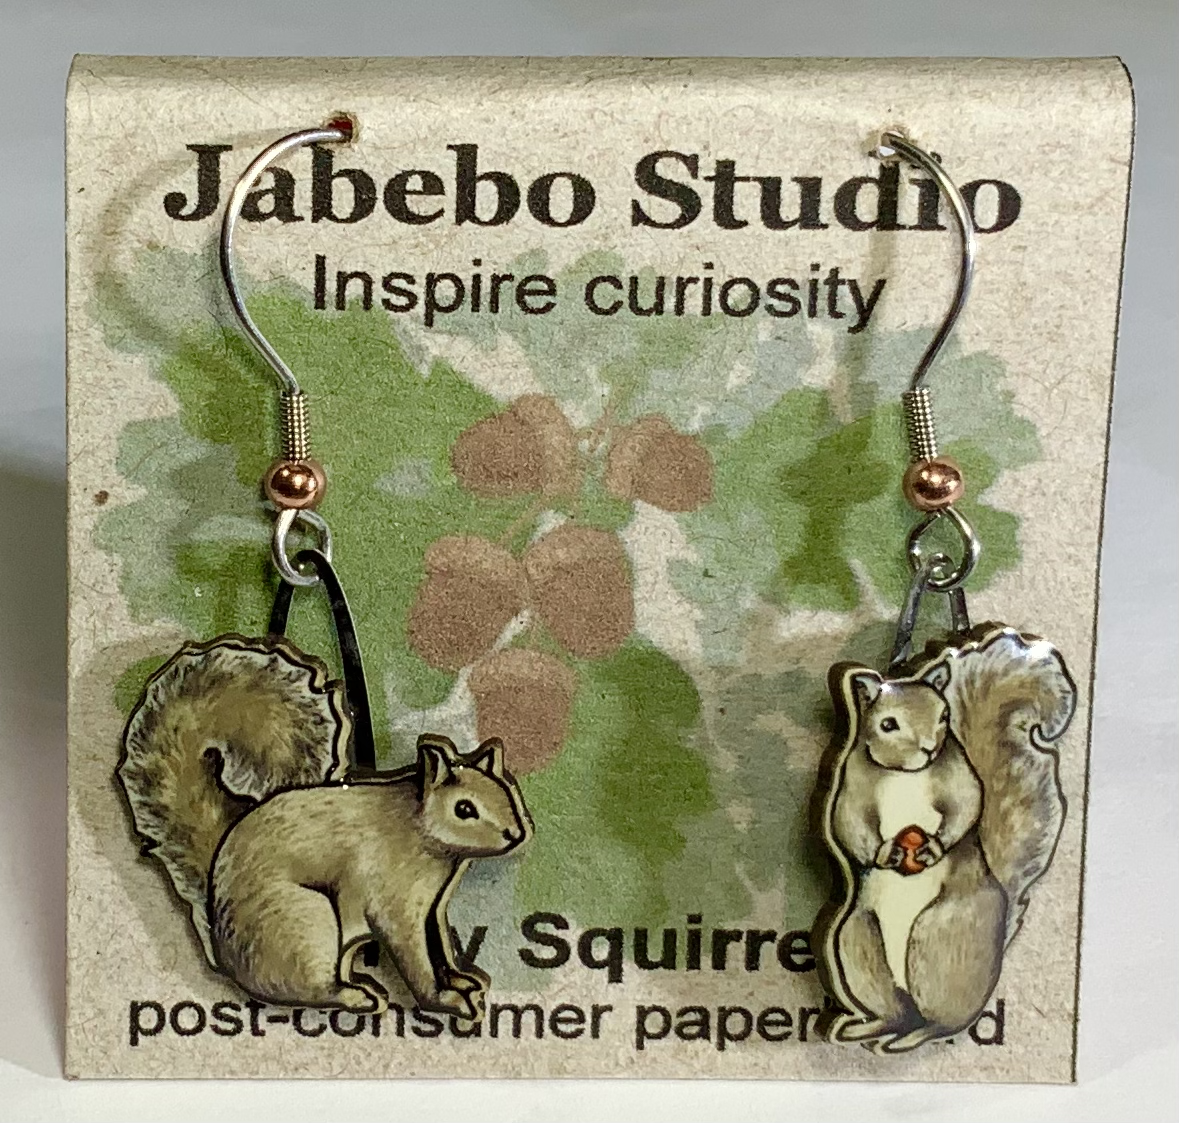 Picture shown is of 1 inch tall pair of earrings of the animal the Gray Squirrel.